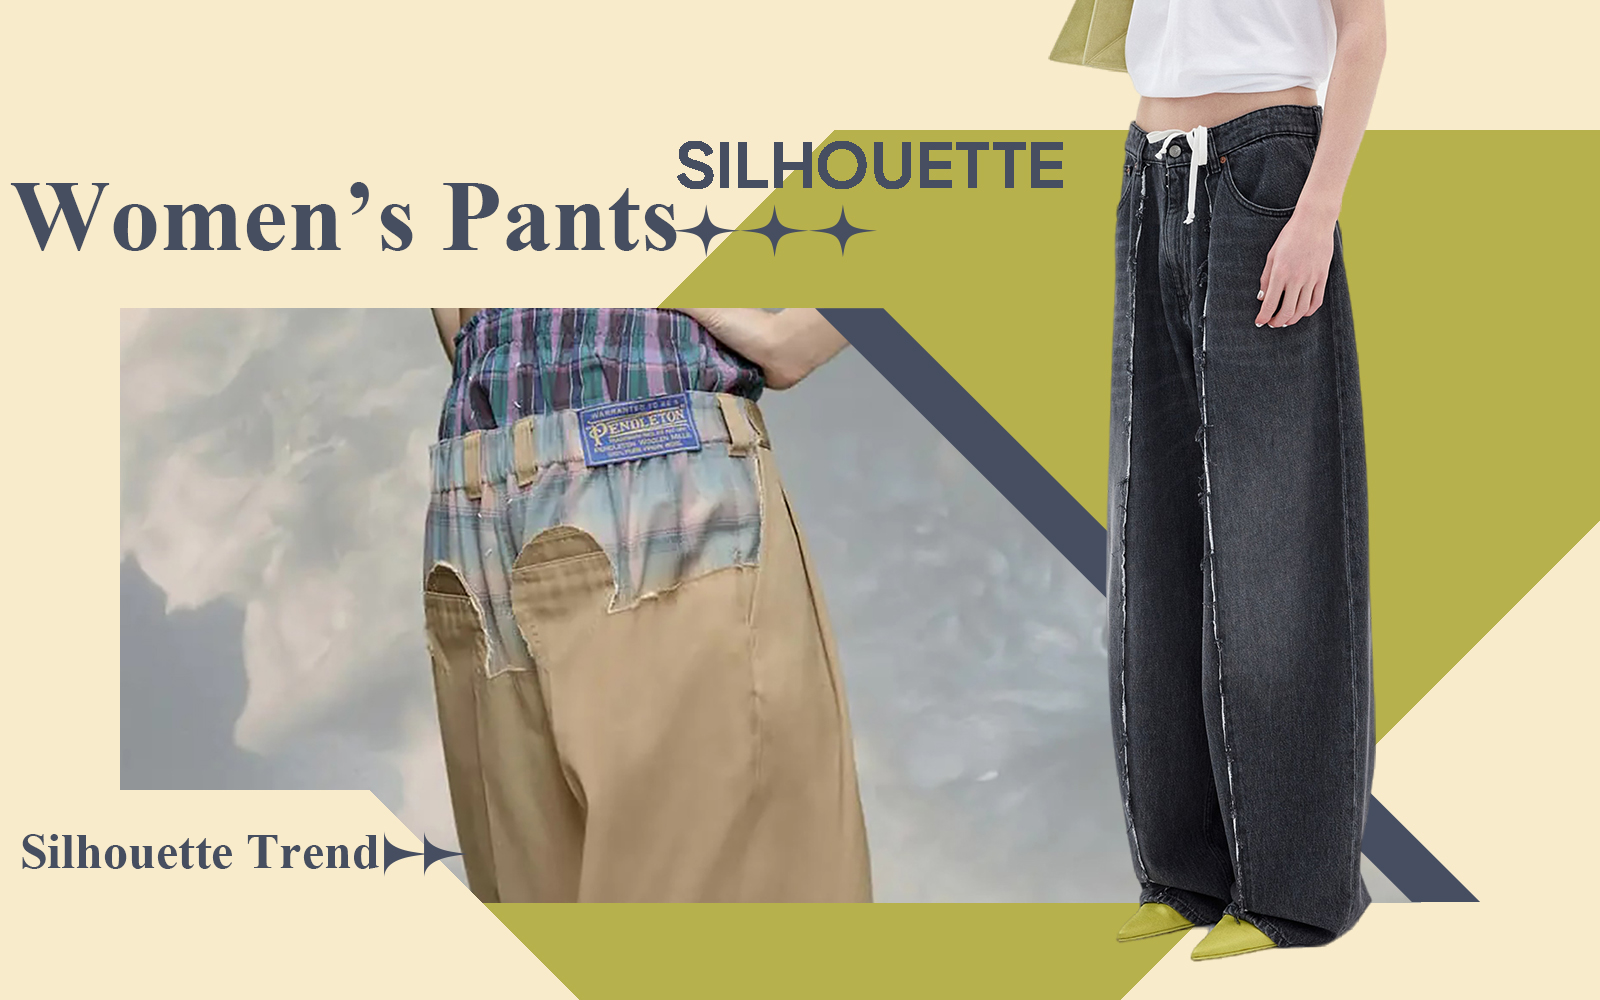 The Silhouette Trend for Women's Pants